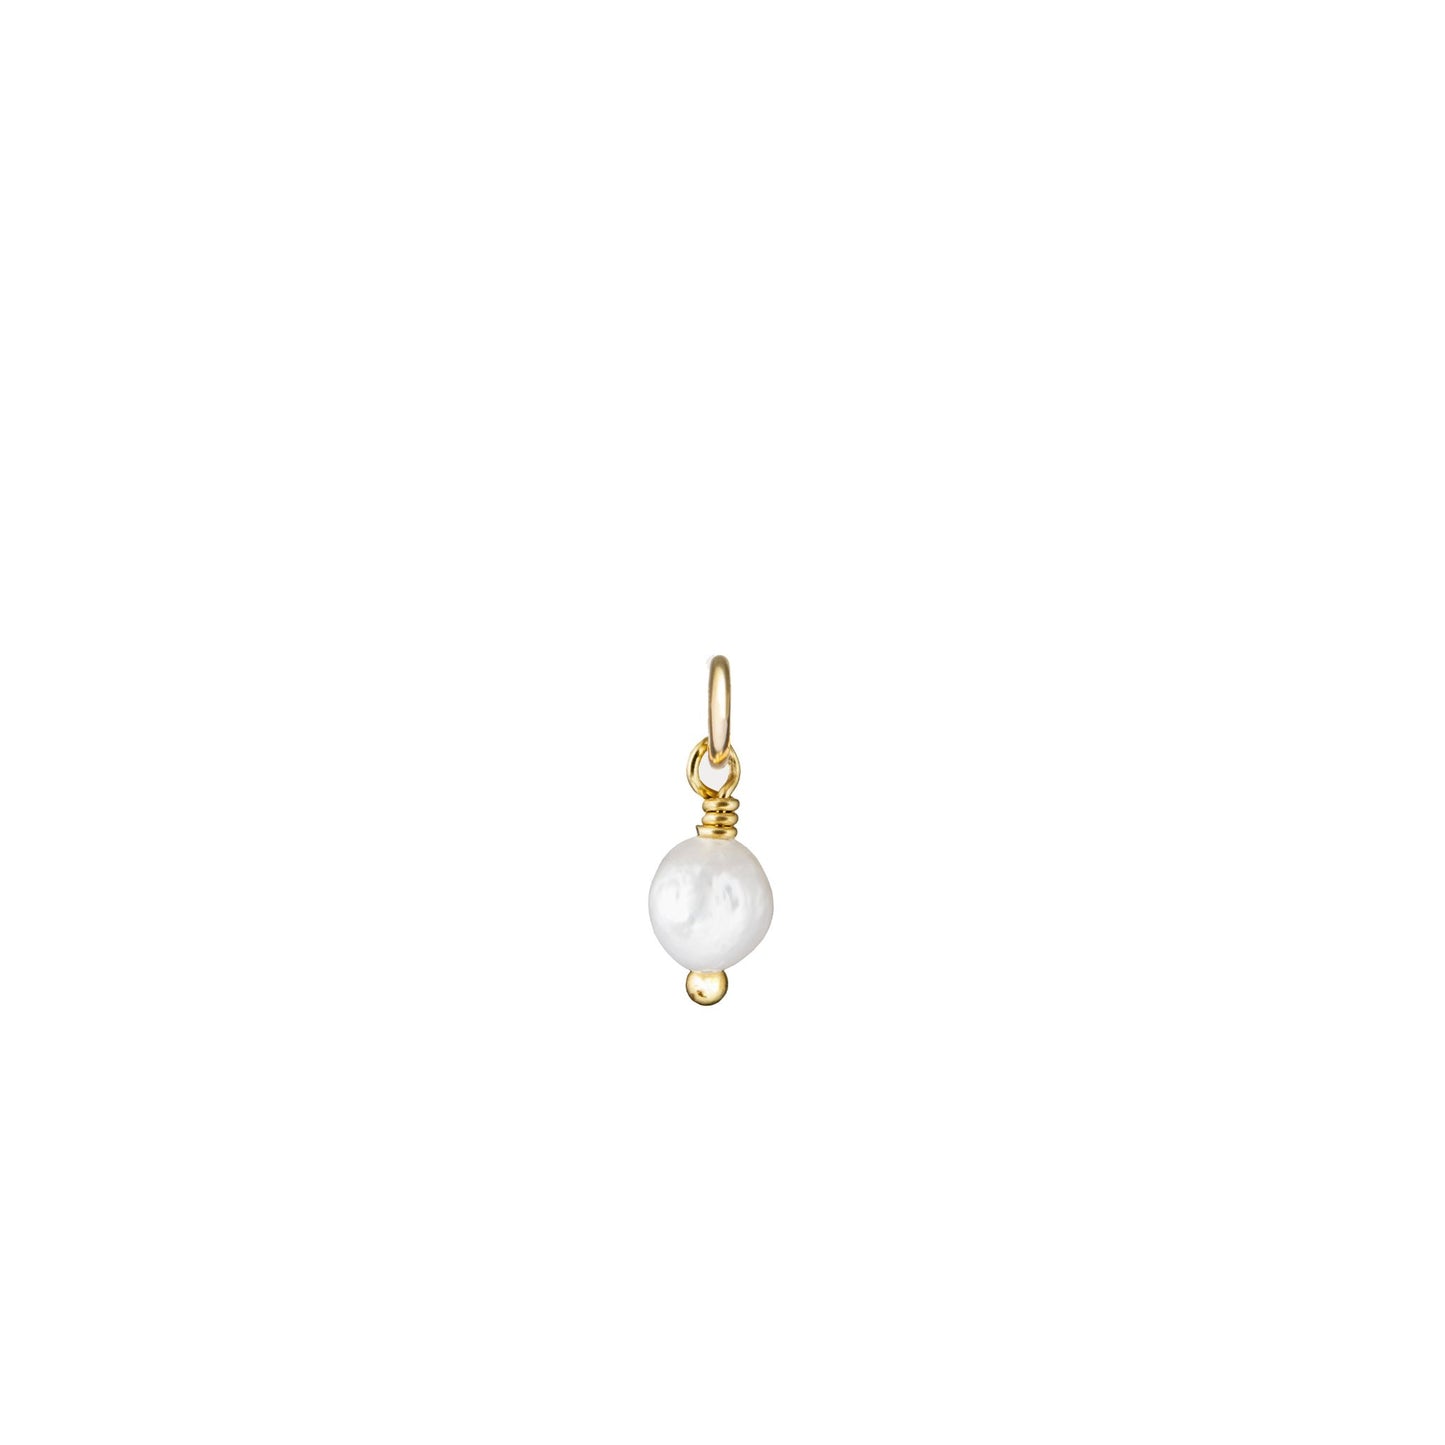 Additional Stone | Tiny Pearl (Gold Plated)